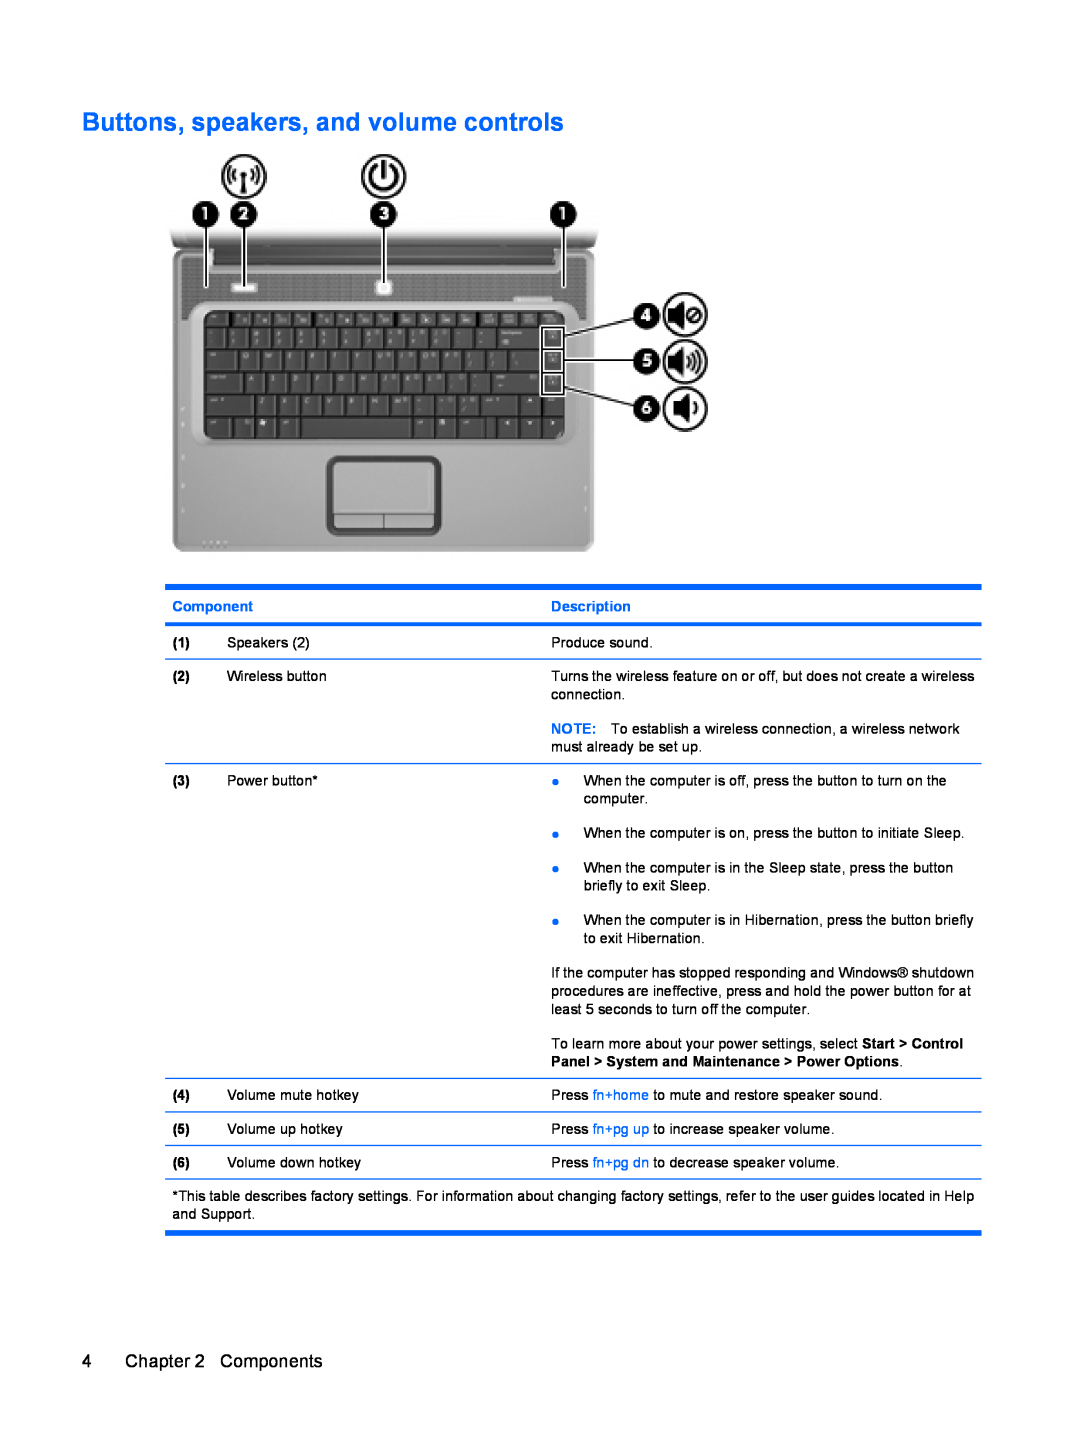 HP C746TU Buttons, speakers, and volume controls, Components, Description, Panel System and Maintenance Power Options 